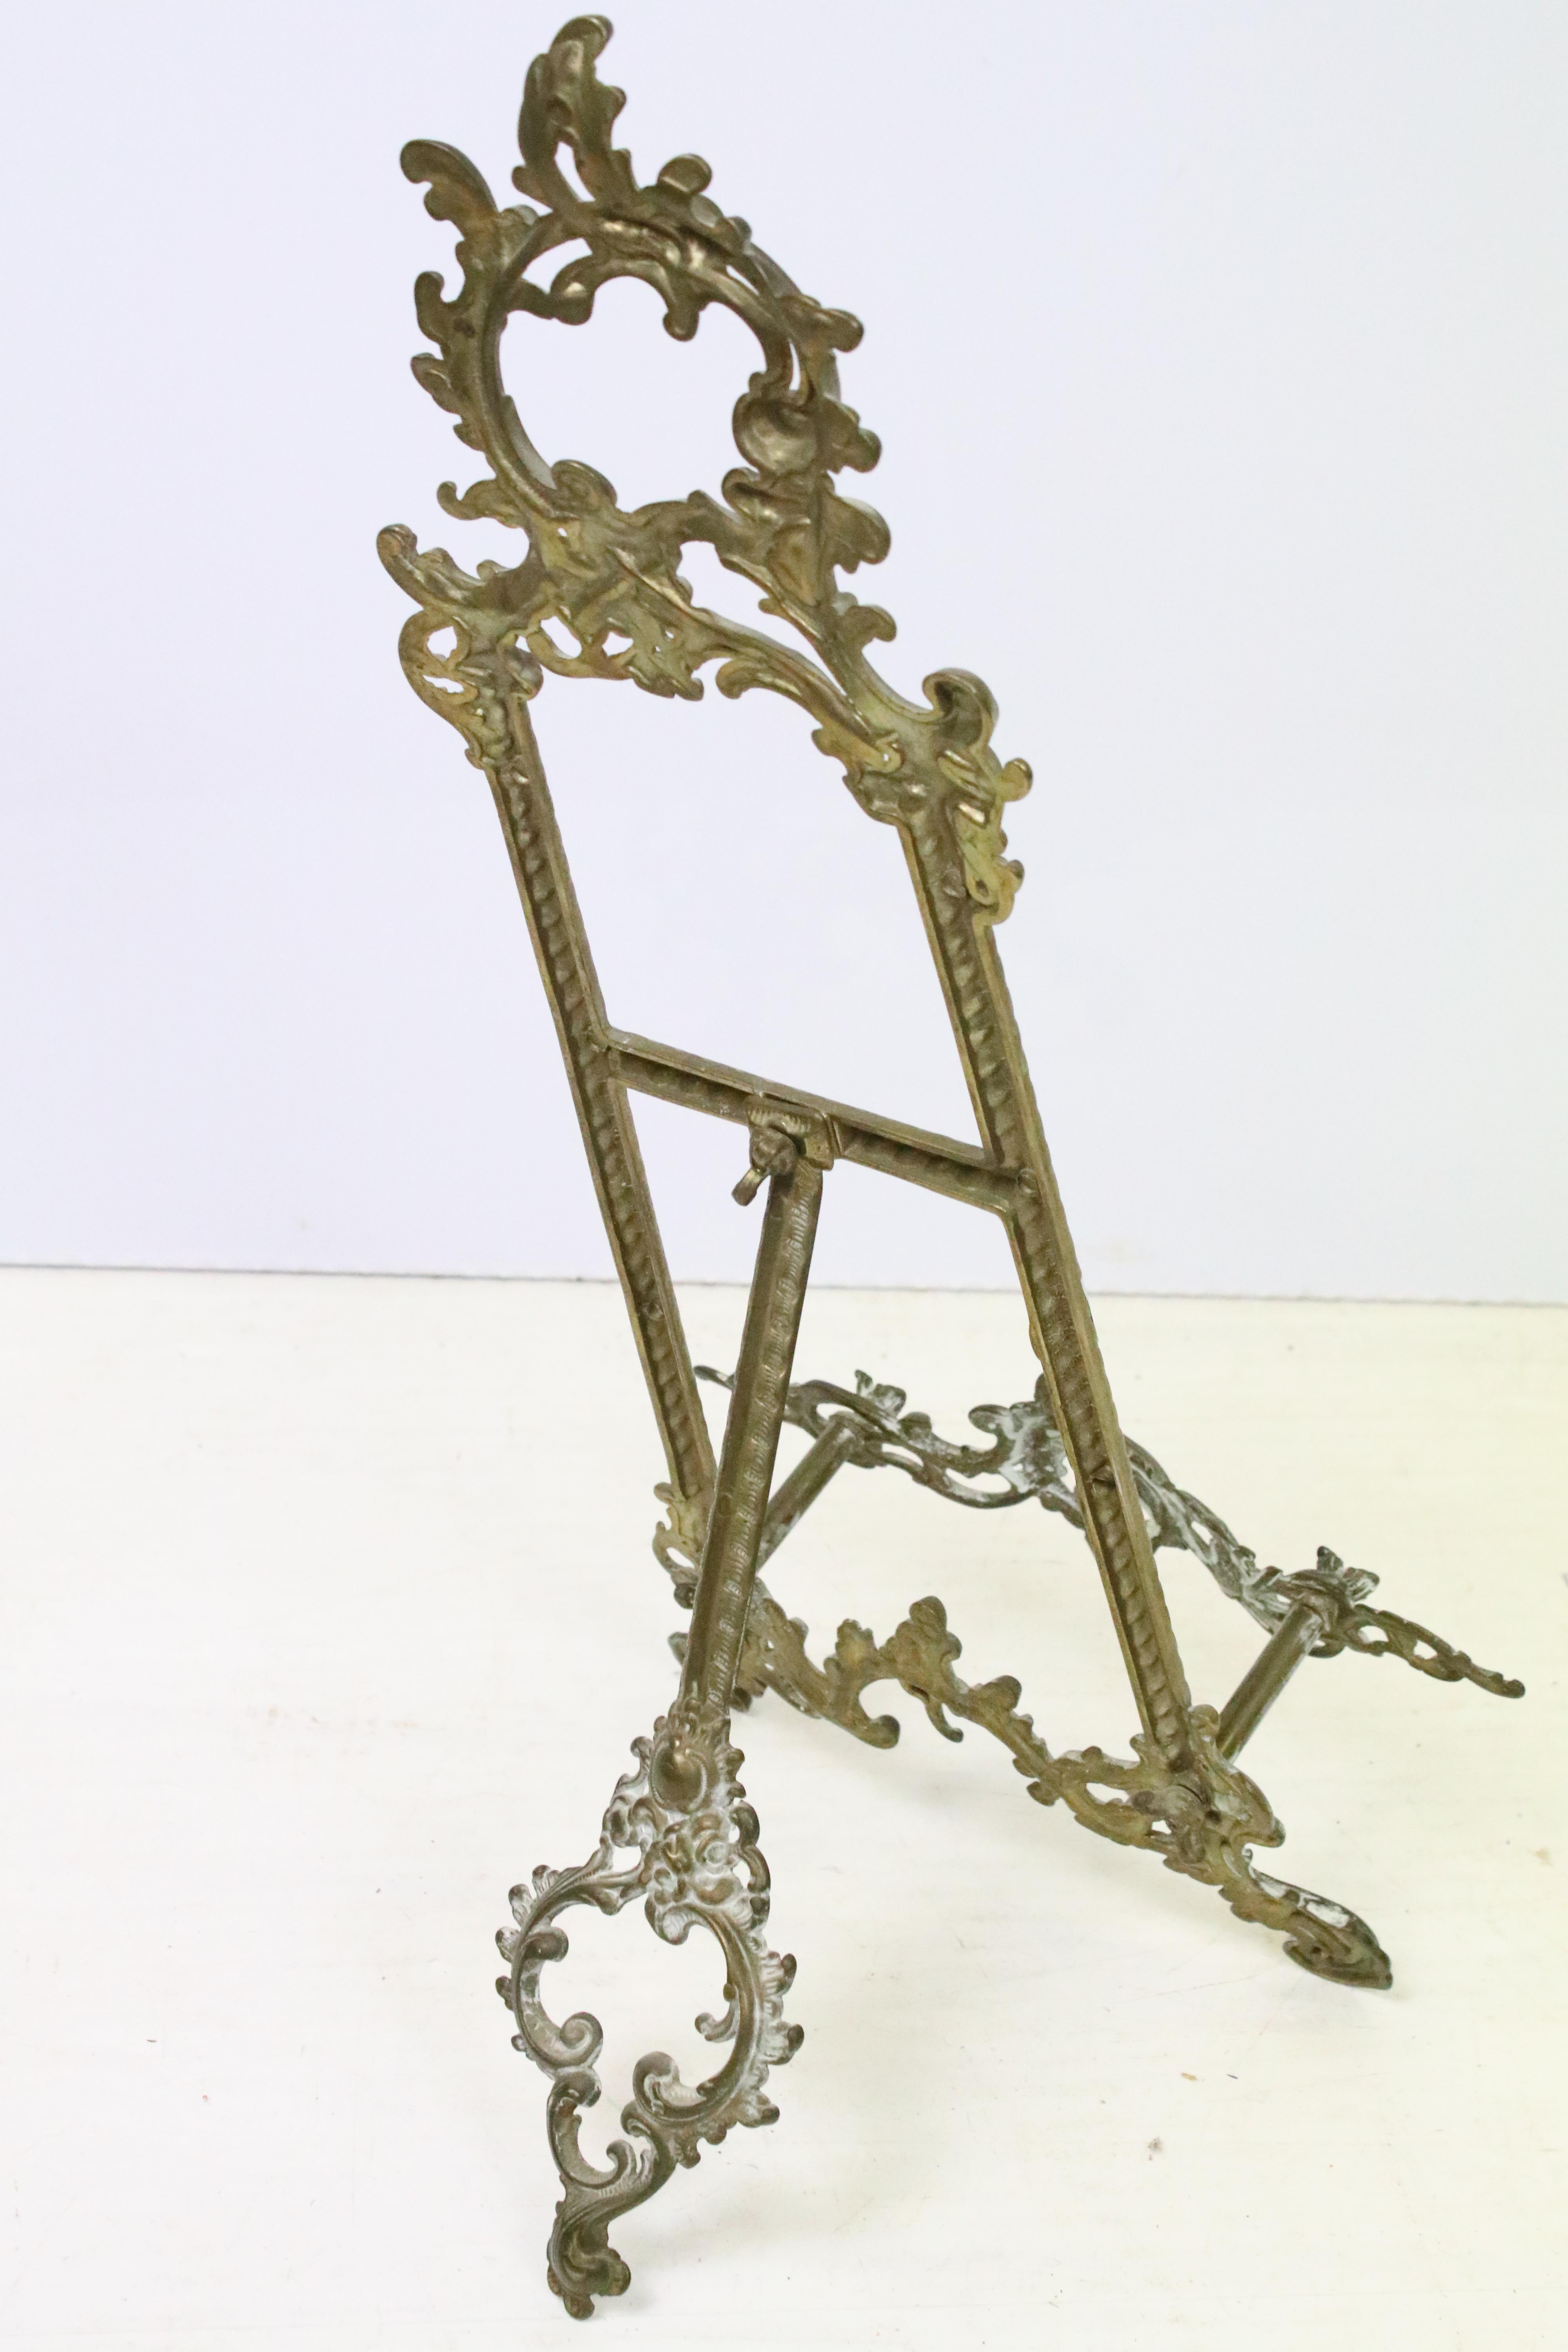 19th Century brass table top picture easel together with an adjustable wooden table top easel. - Image 4 of 6